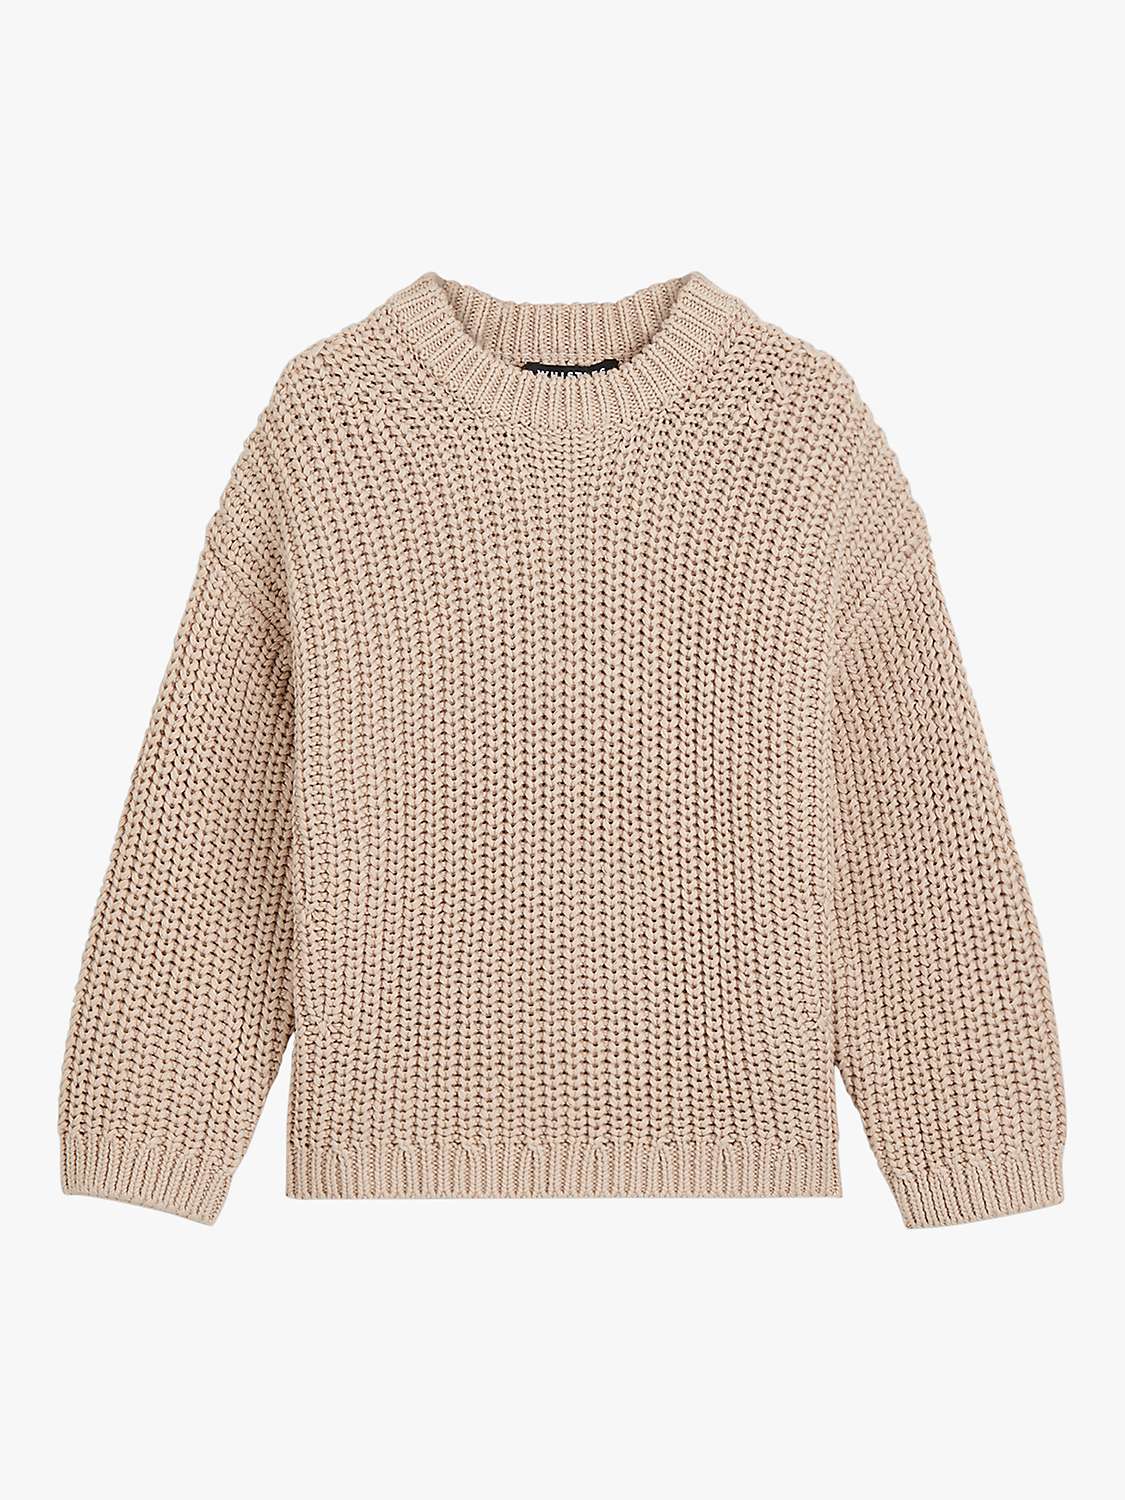 Buy Whistles Kids' Chunky Cotton Rib Knit Jumper Online at johnlewis.com